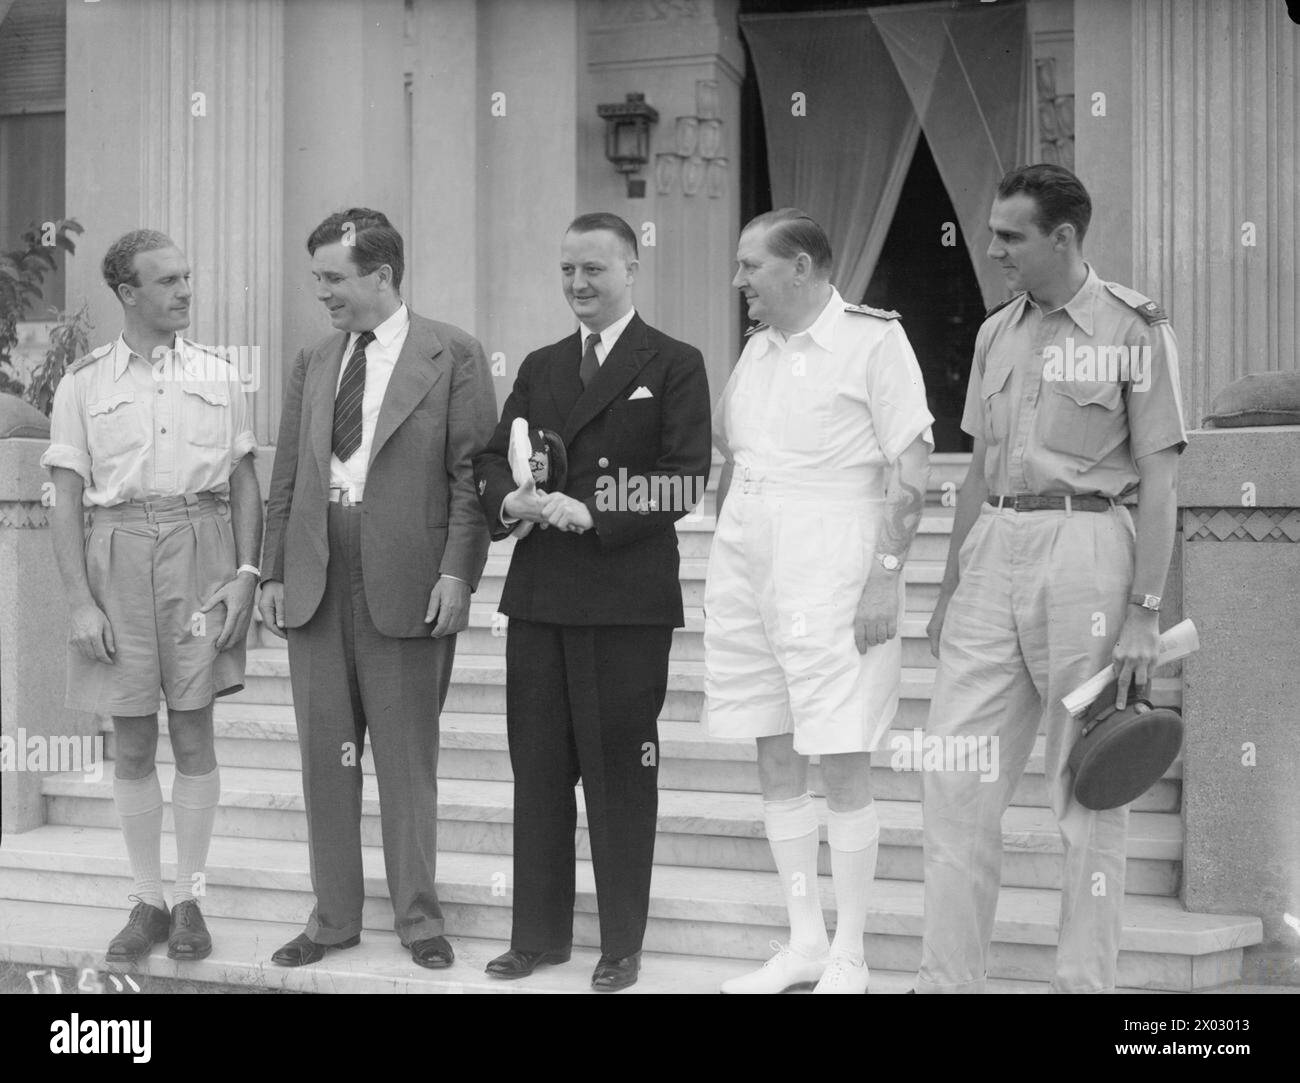 MR WENDELL WILLKIE IN ALEXANDRIA. DURING HIS MIDDLE EAST TOUR MR WENDELL WILLKIE MET ADMIRAL SIR HENRY HARWOOD, GENERAL MAXWELL AND PRESSMEN. 6 SEPTEMBER 1942. - (L to R) John Nixon, Mr Wendell Willkie, Larry Allen, Admiral Sir Henry Harwood and George Palmer Stock Photo